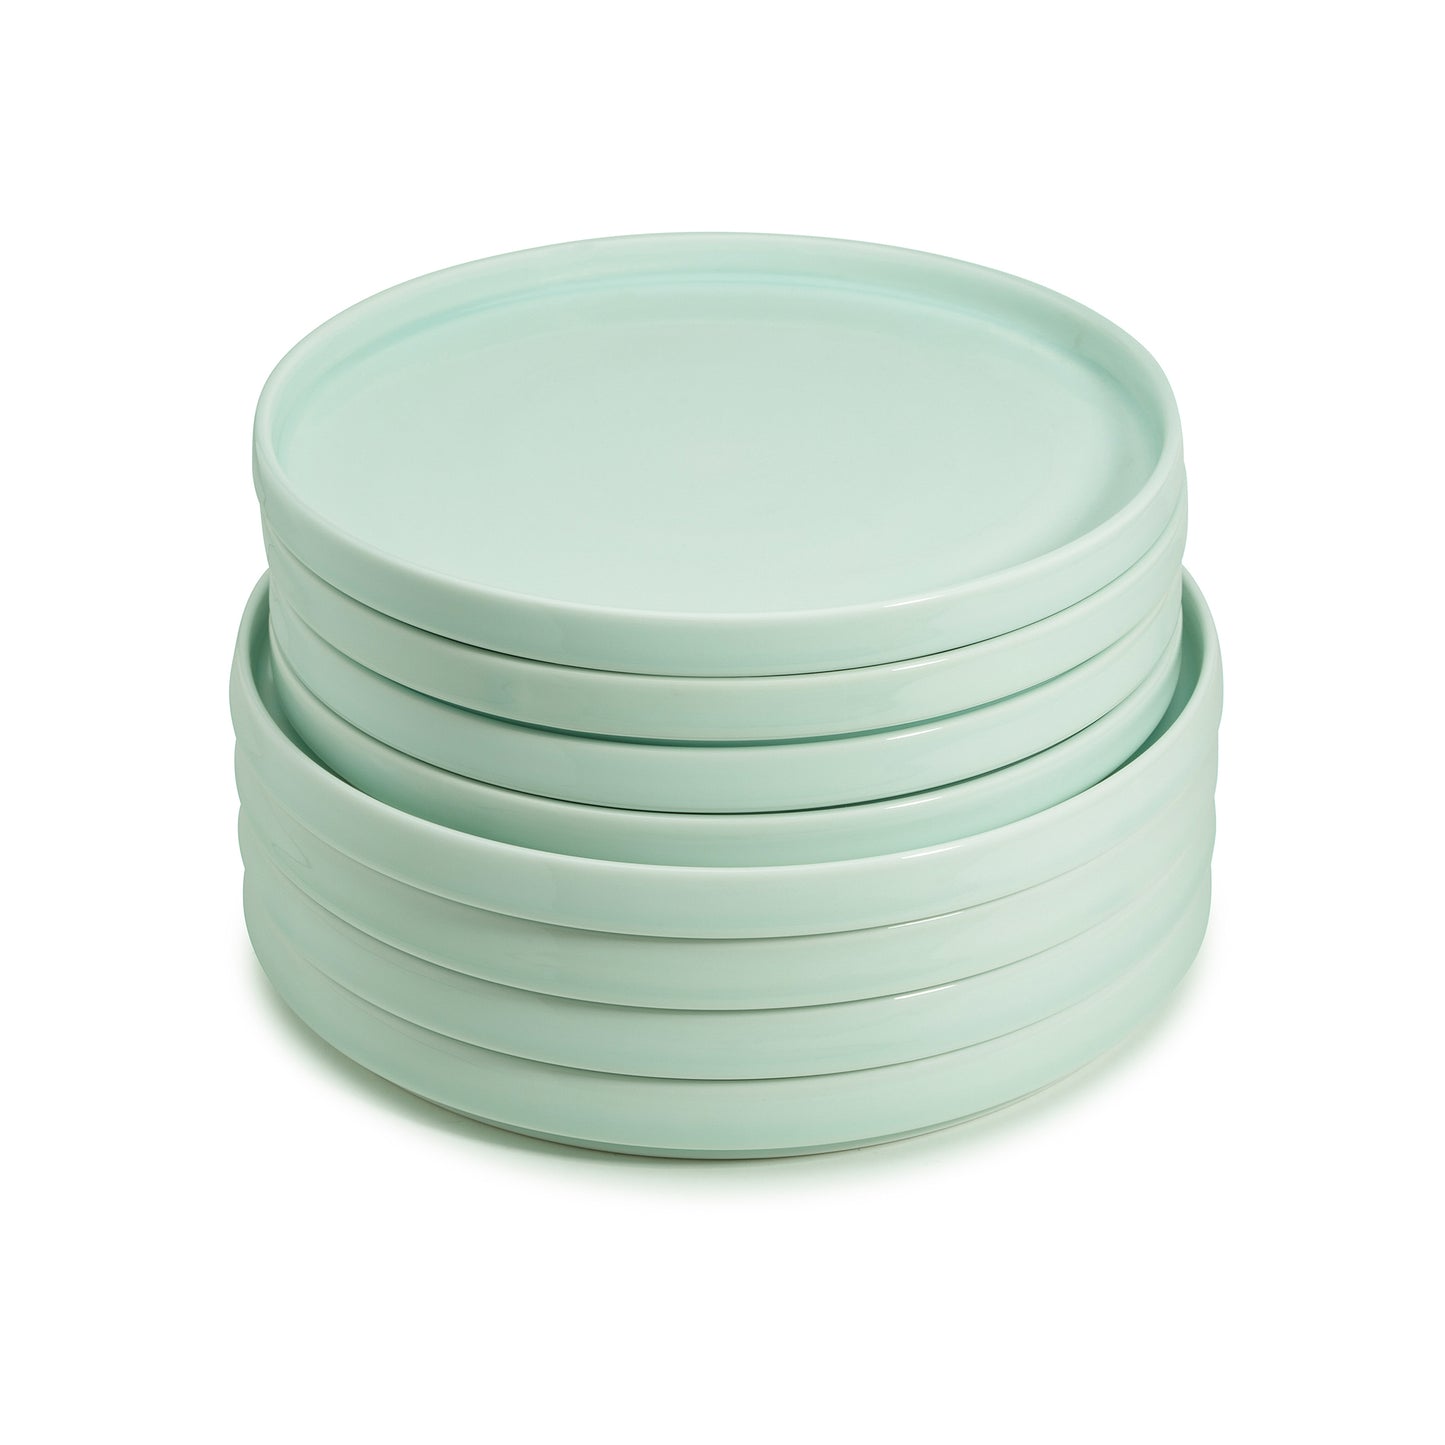 8 piece green celadon porcelain straight-sided dinner plates set, all stacked, media 4 of 5